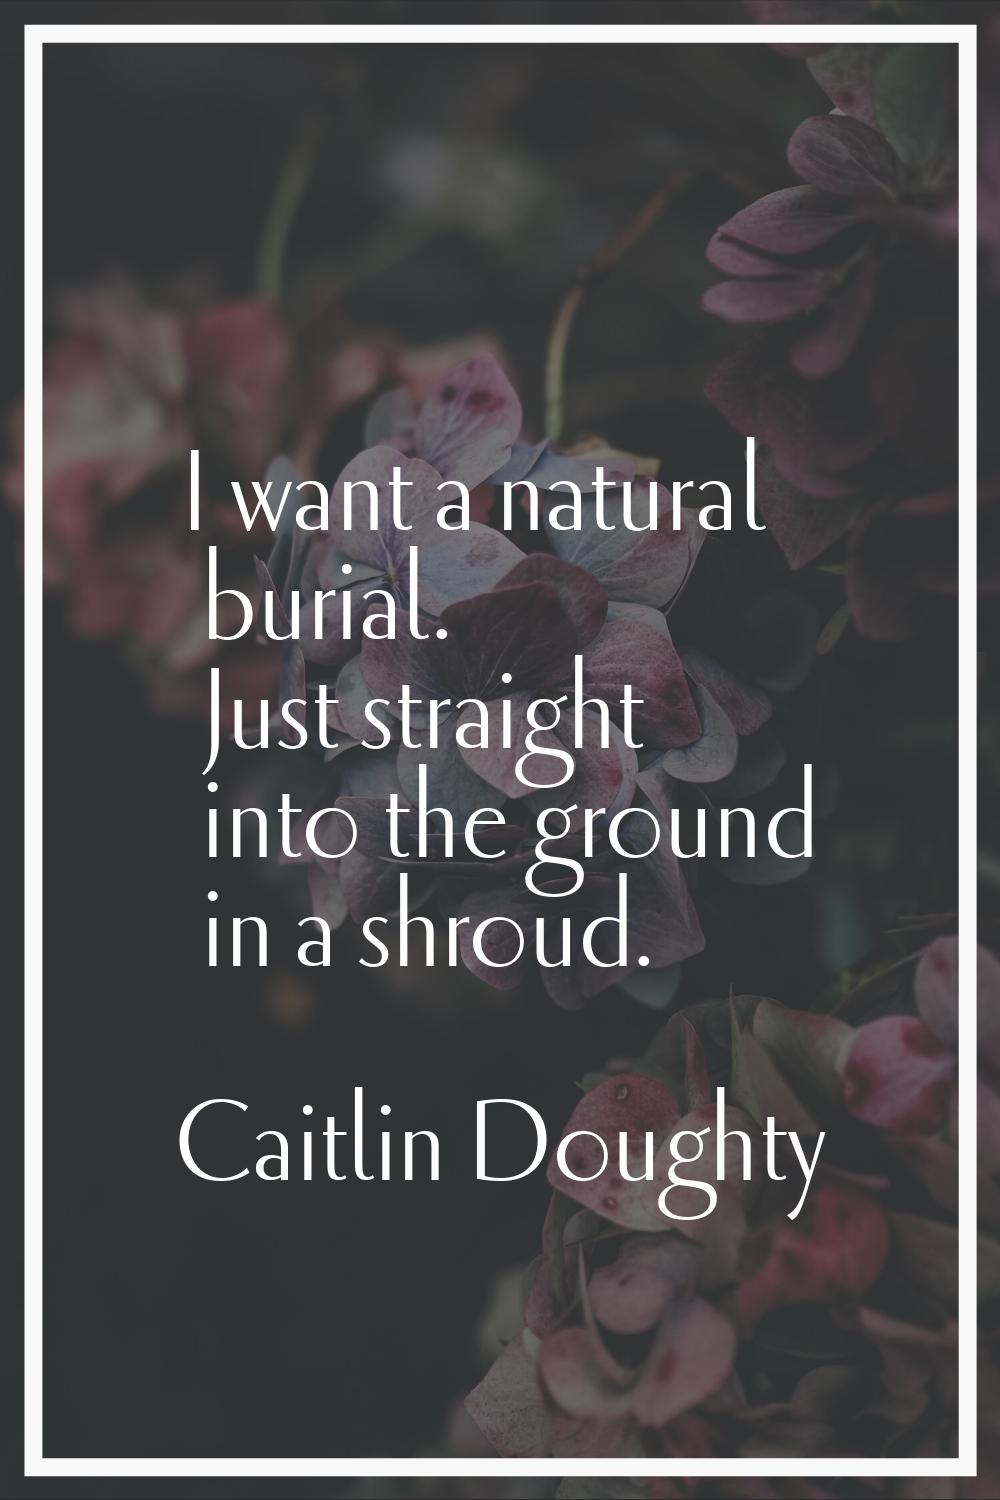 I want a natural burial. Just straight into the ground in a shroud.